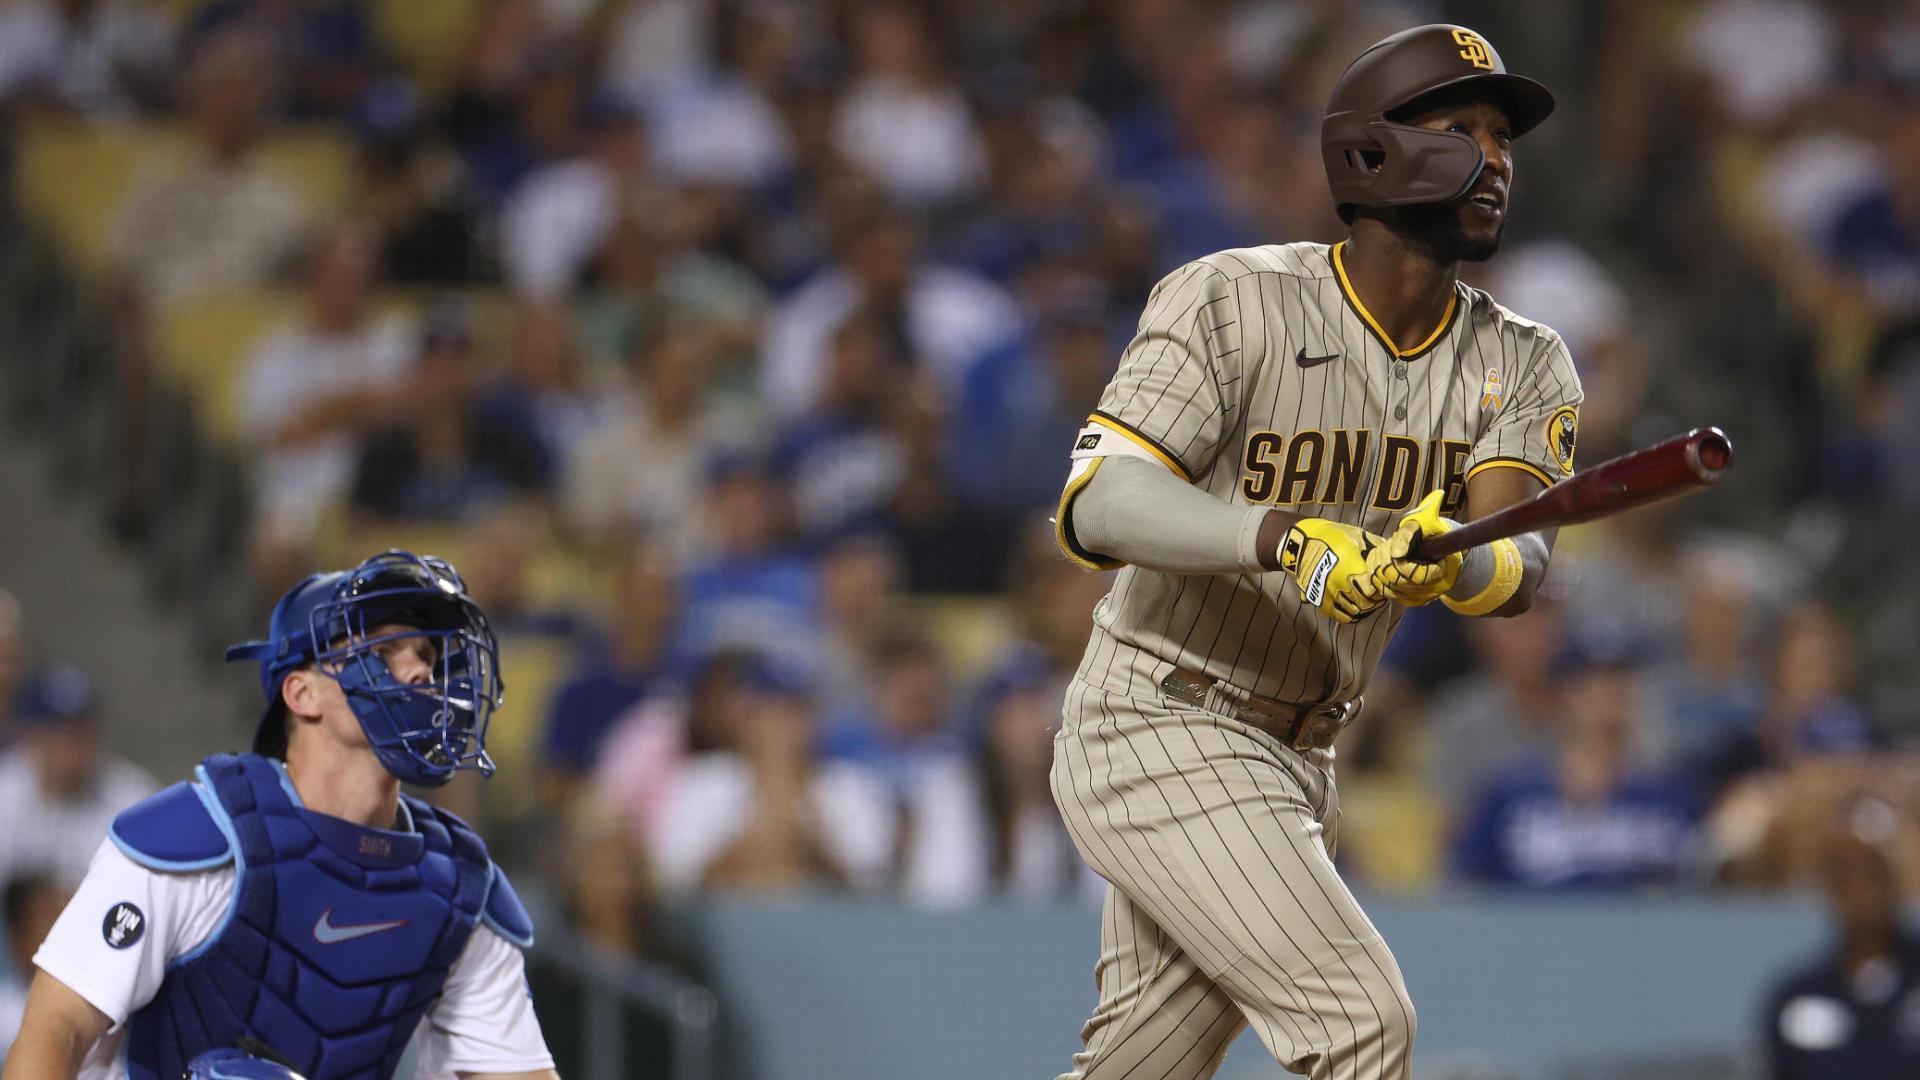 Padres rout Dodgers 7-1, send LA on rare 3-game skid